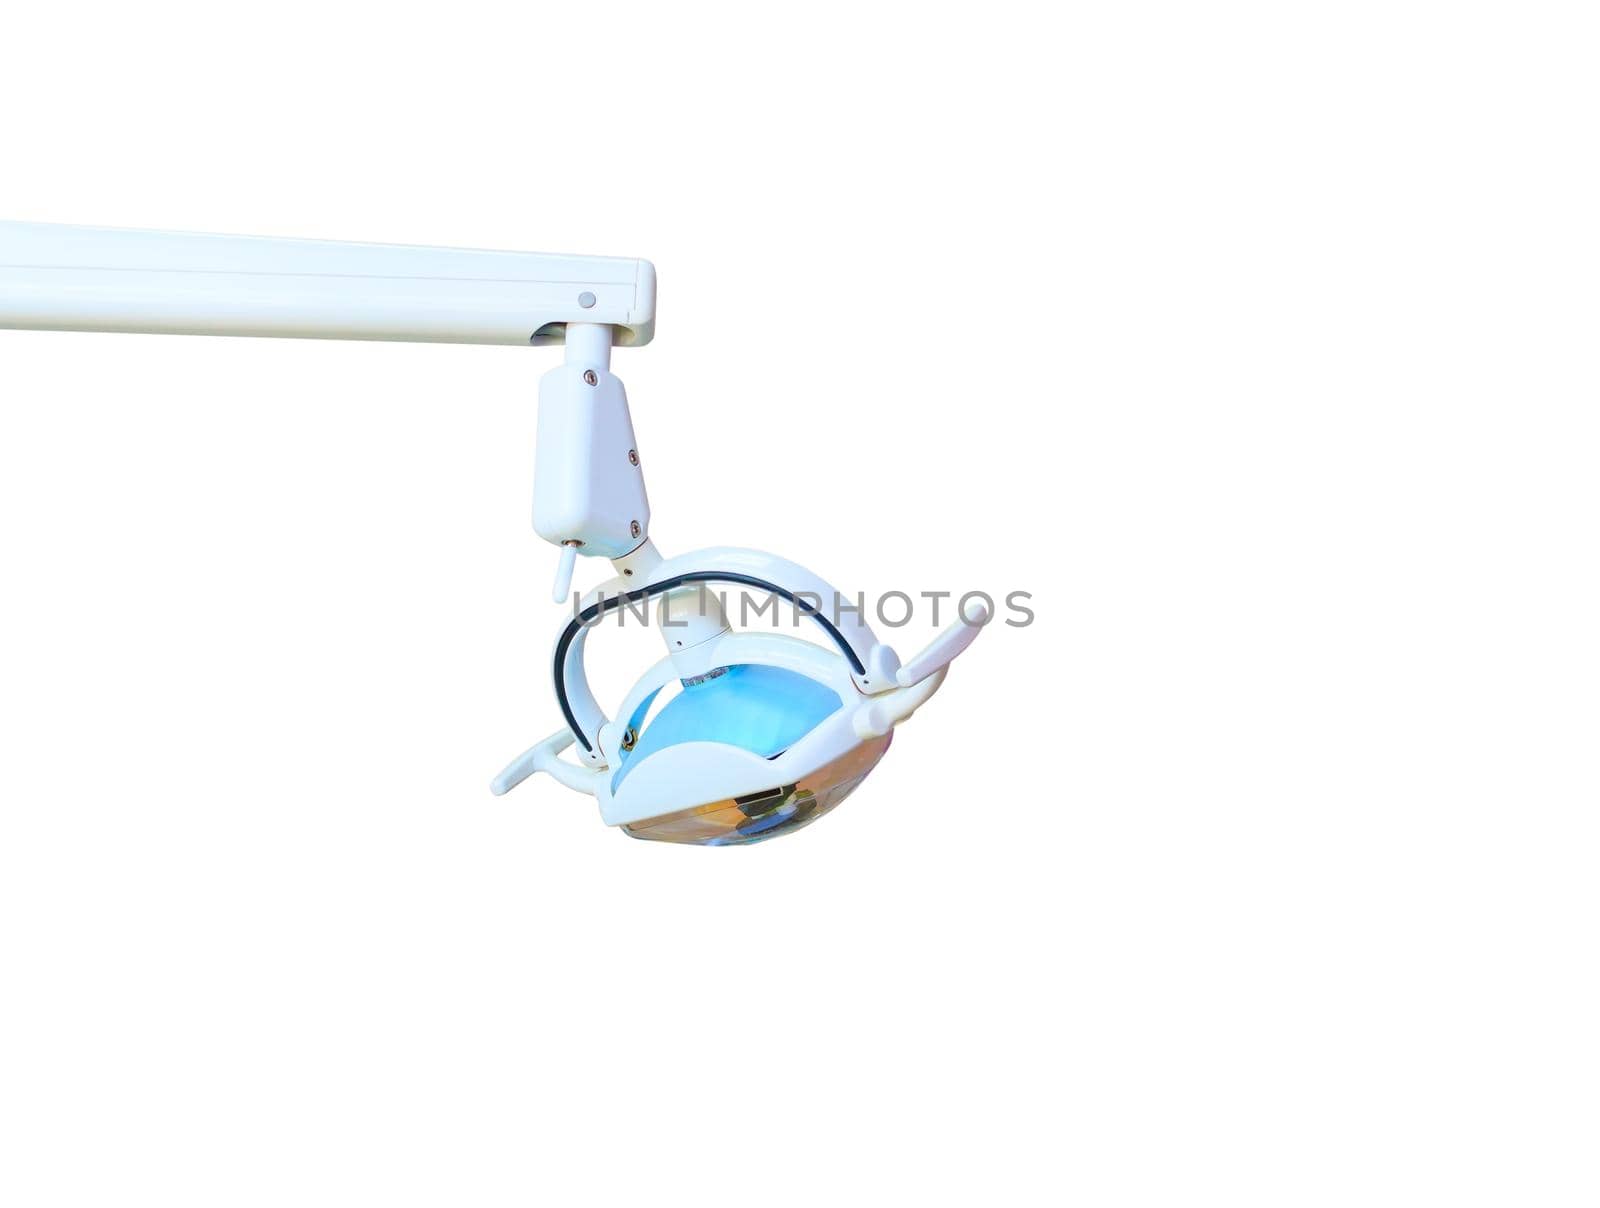 lamp in dental clinic Interior of dentist office health care and medicine with clipping path isolated on white background by pramot